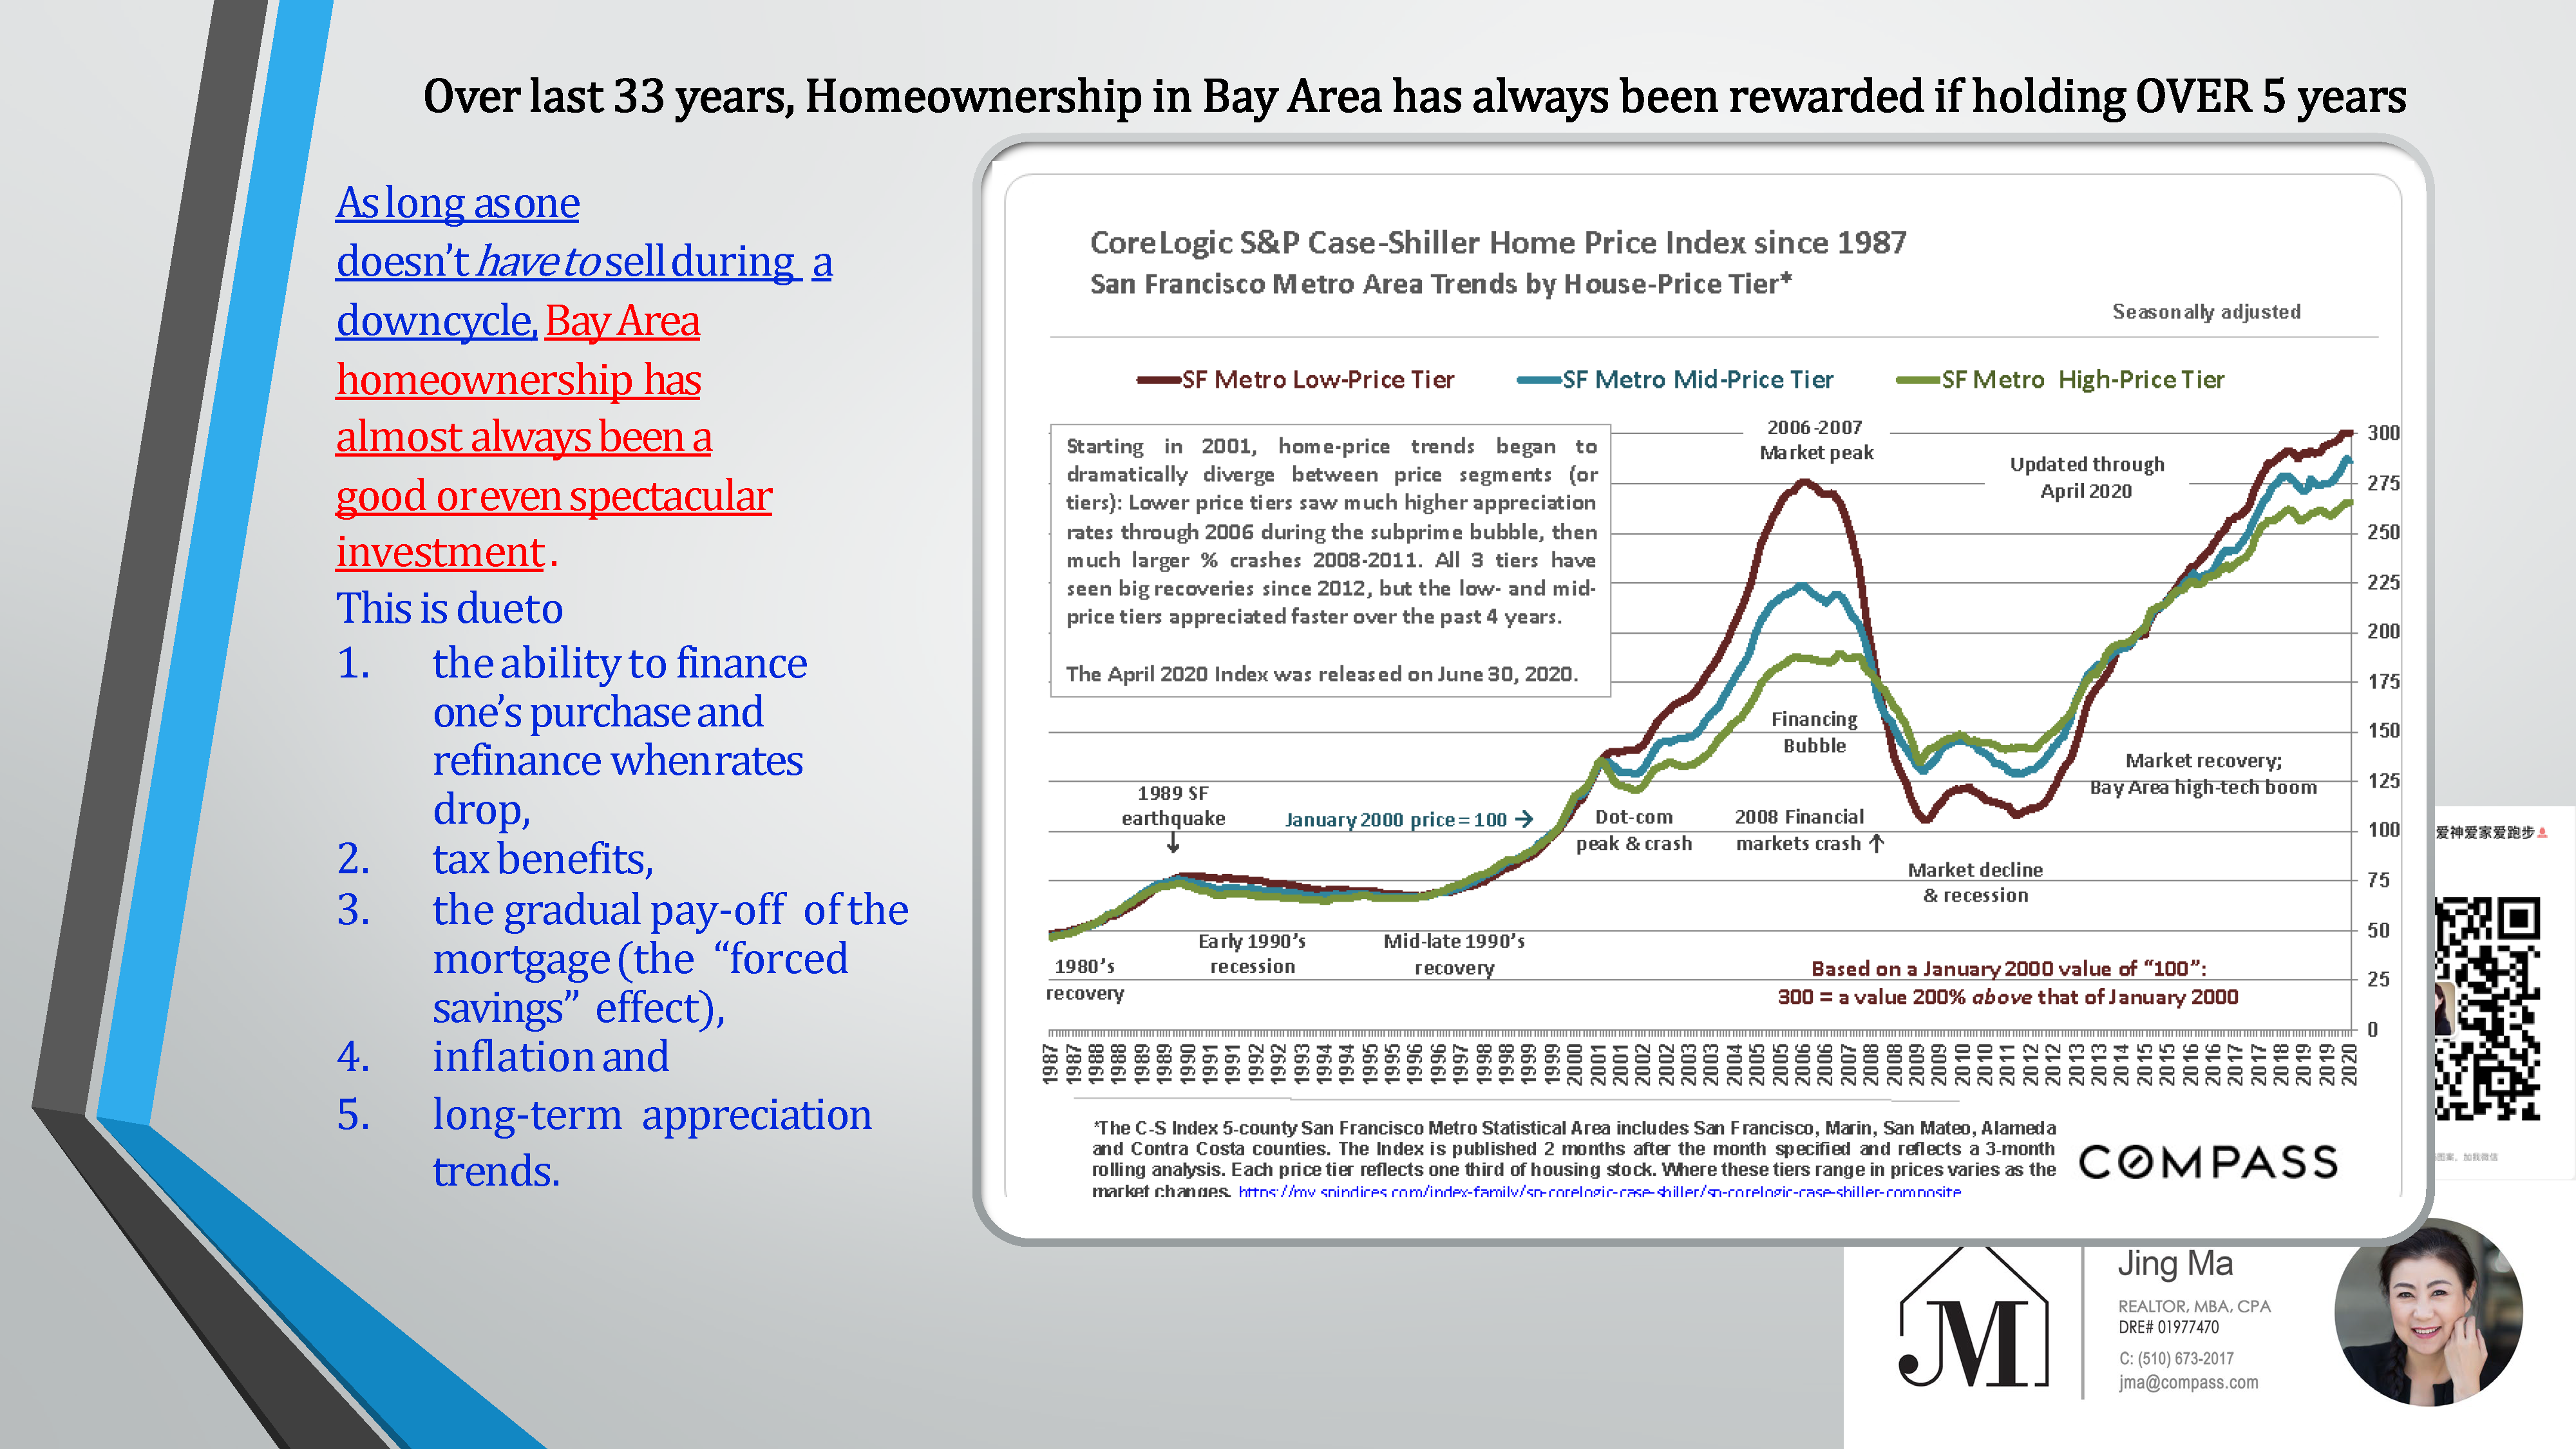 Q3 2020 Market Watch and Analysis – Bay Area Homeownership